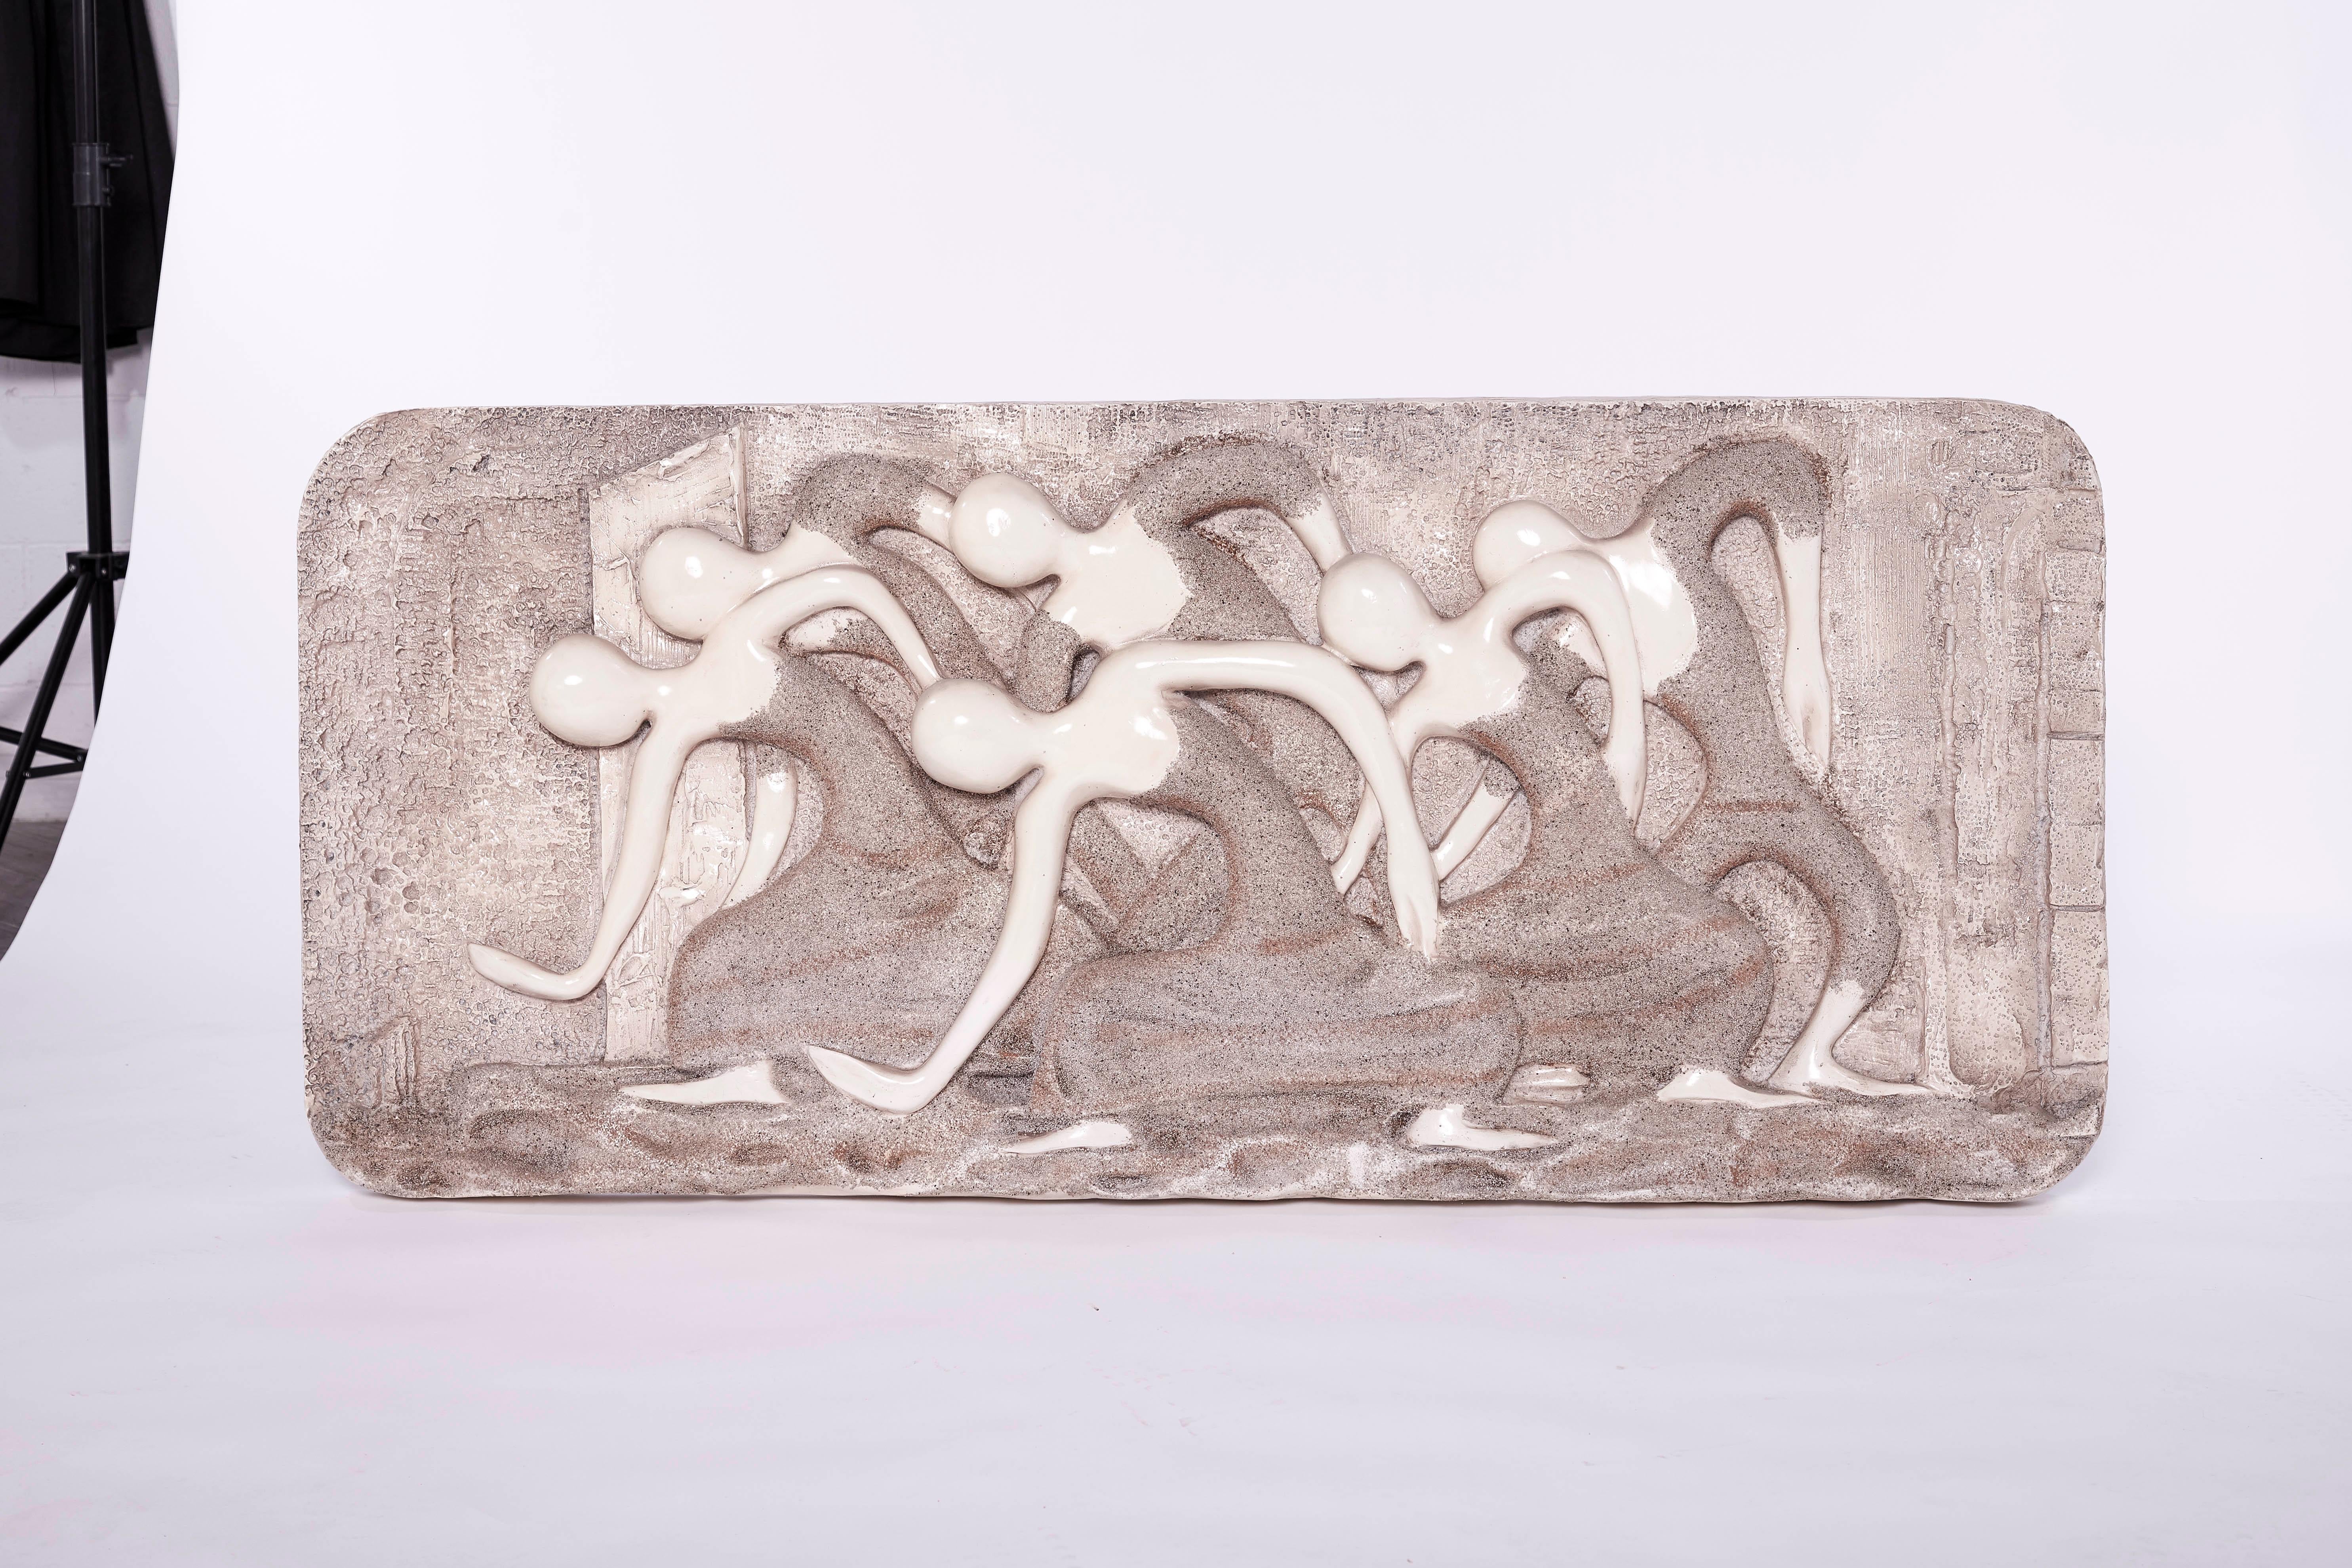 A Mid-Century Modern wall sculpture hand-crafted out of fiberglass. This fabulous sculpture features a unique relief design depicting a free spirit dancer. This piece is eye-catching and a perfect addition to a living room space.